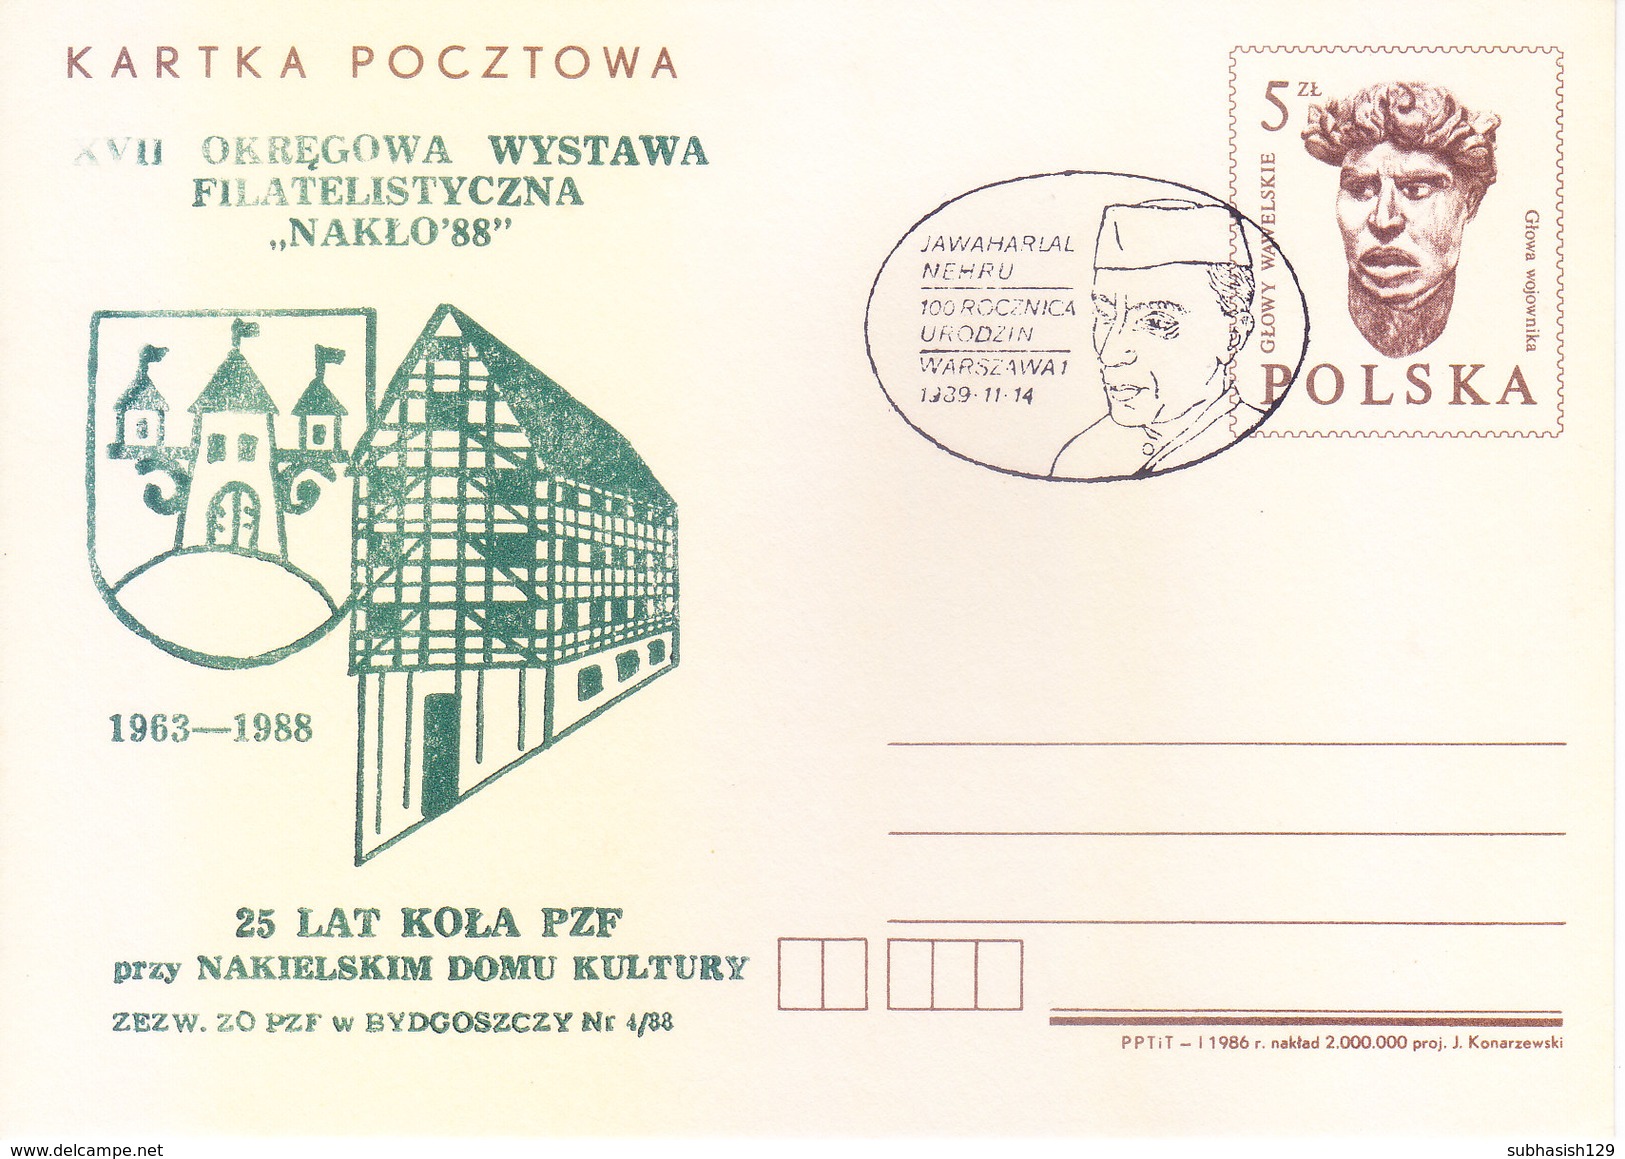 POLAND 14-11-1989 SPECIAL CANCELLATION ON PANDIT JAWAHARLAL NEHRU - UNUSED / MINT - Covers & Documents